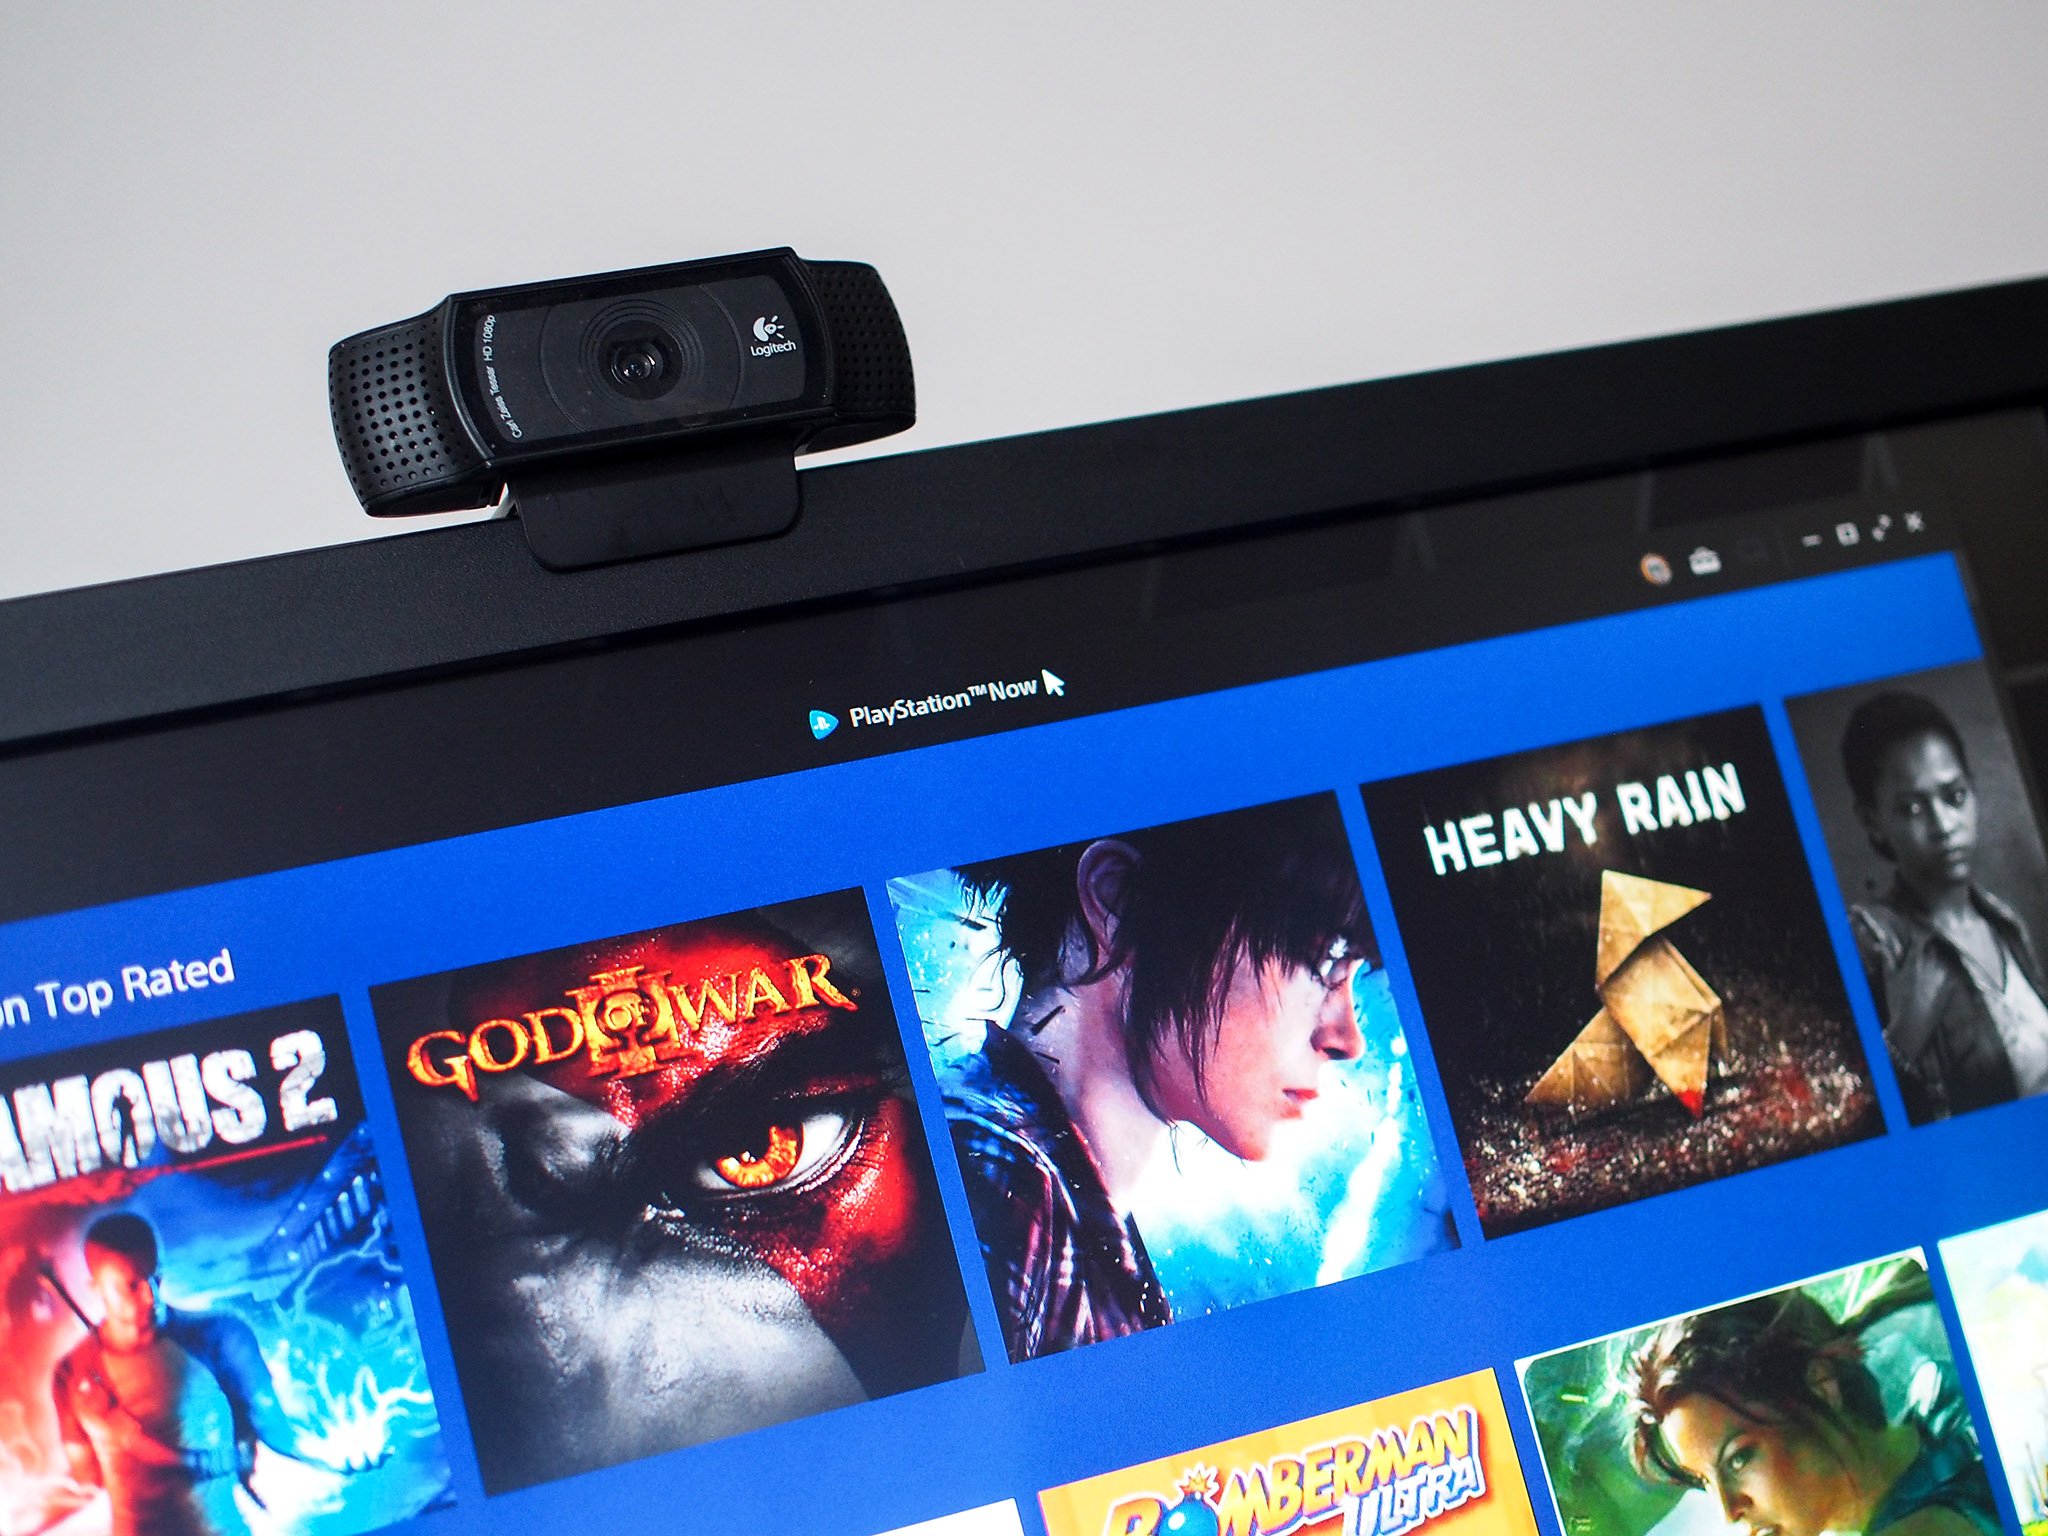 Everything you need to know about PlayStation Now before subscribing